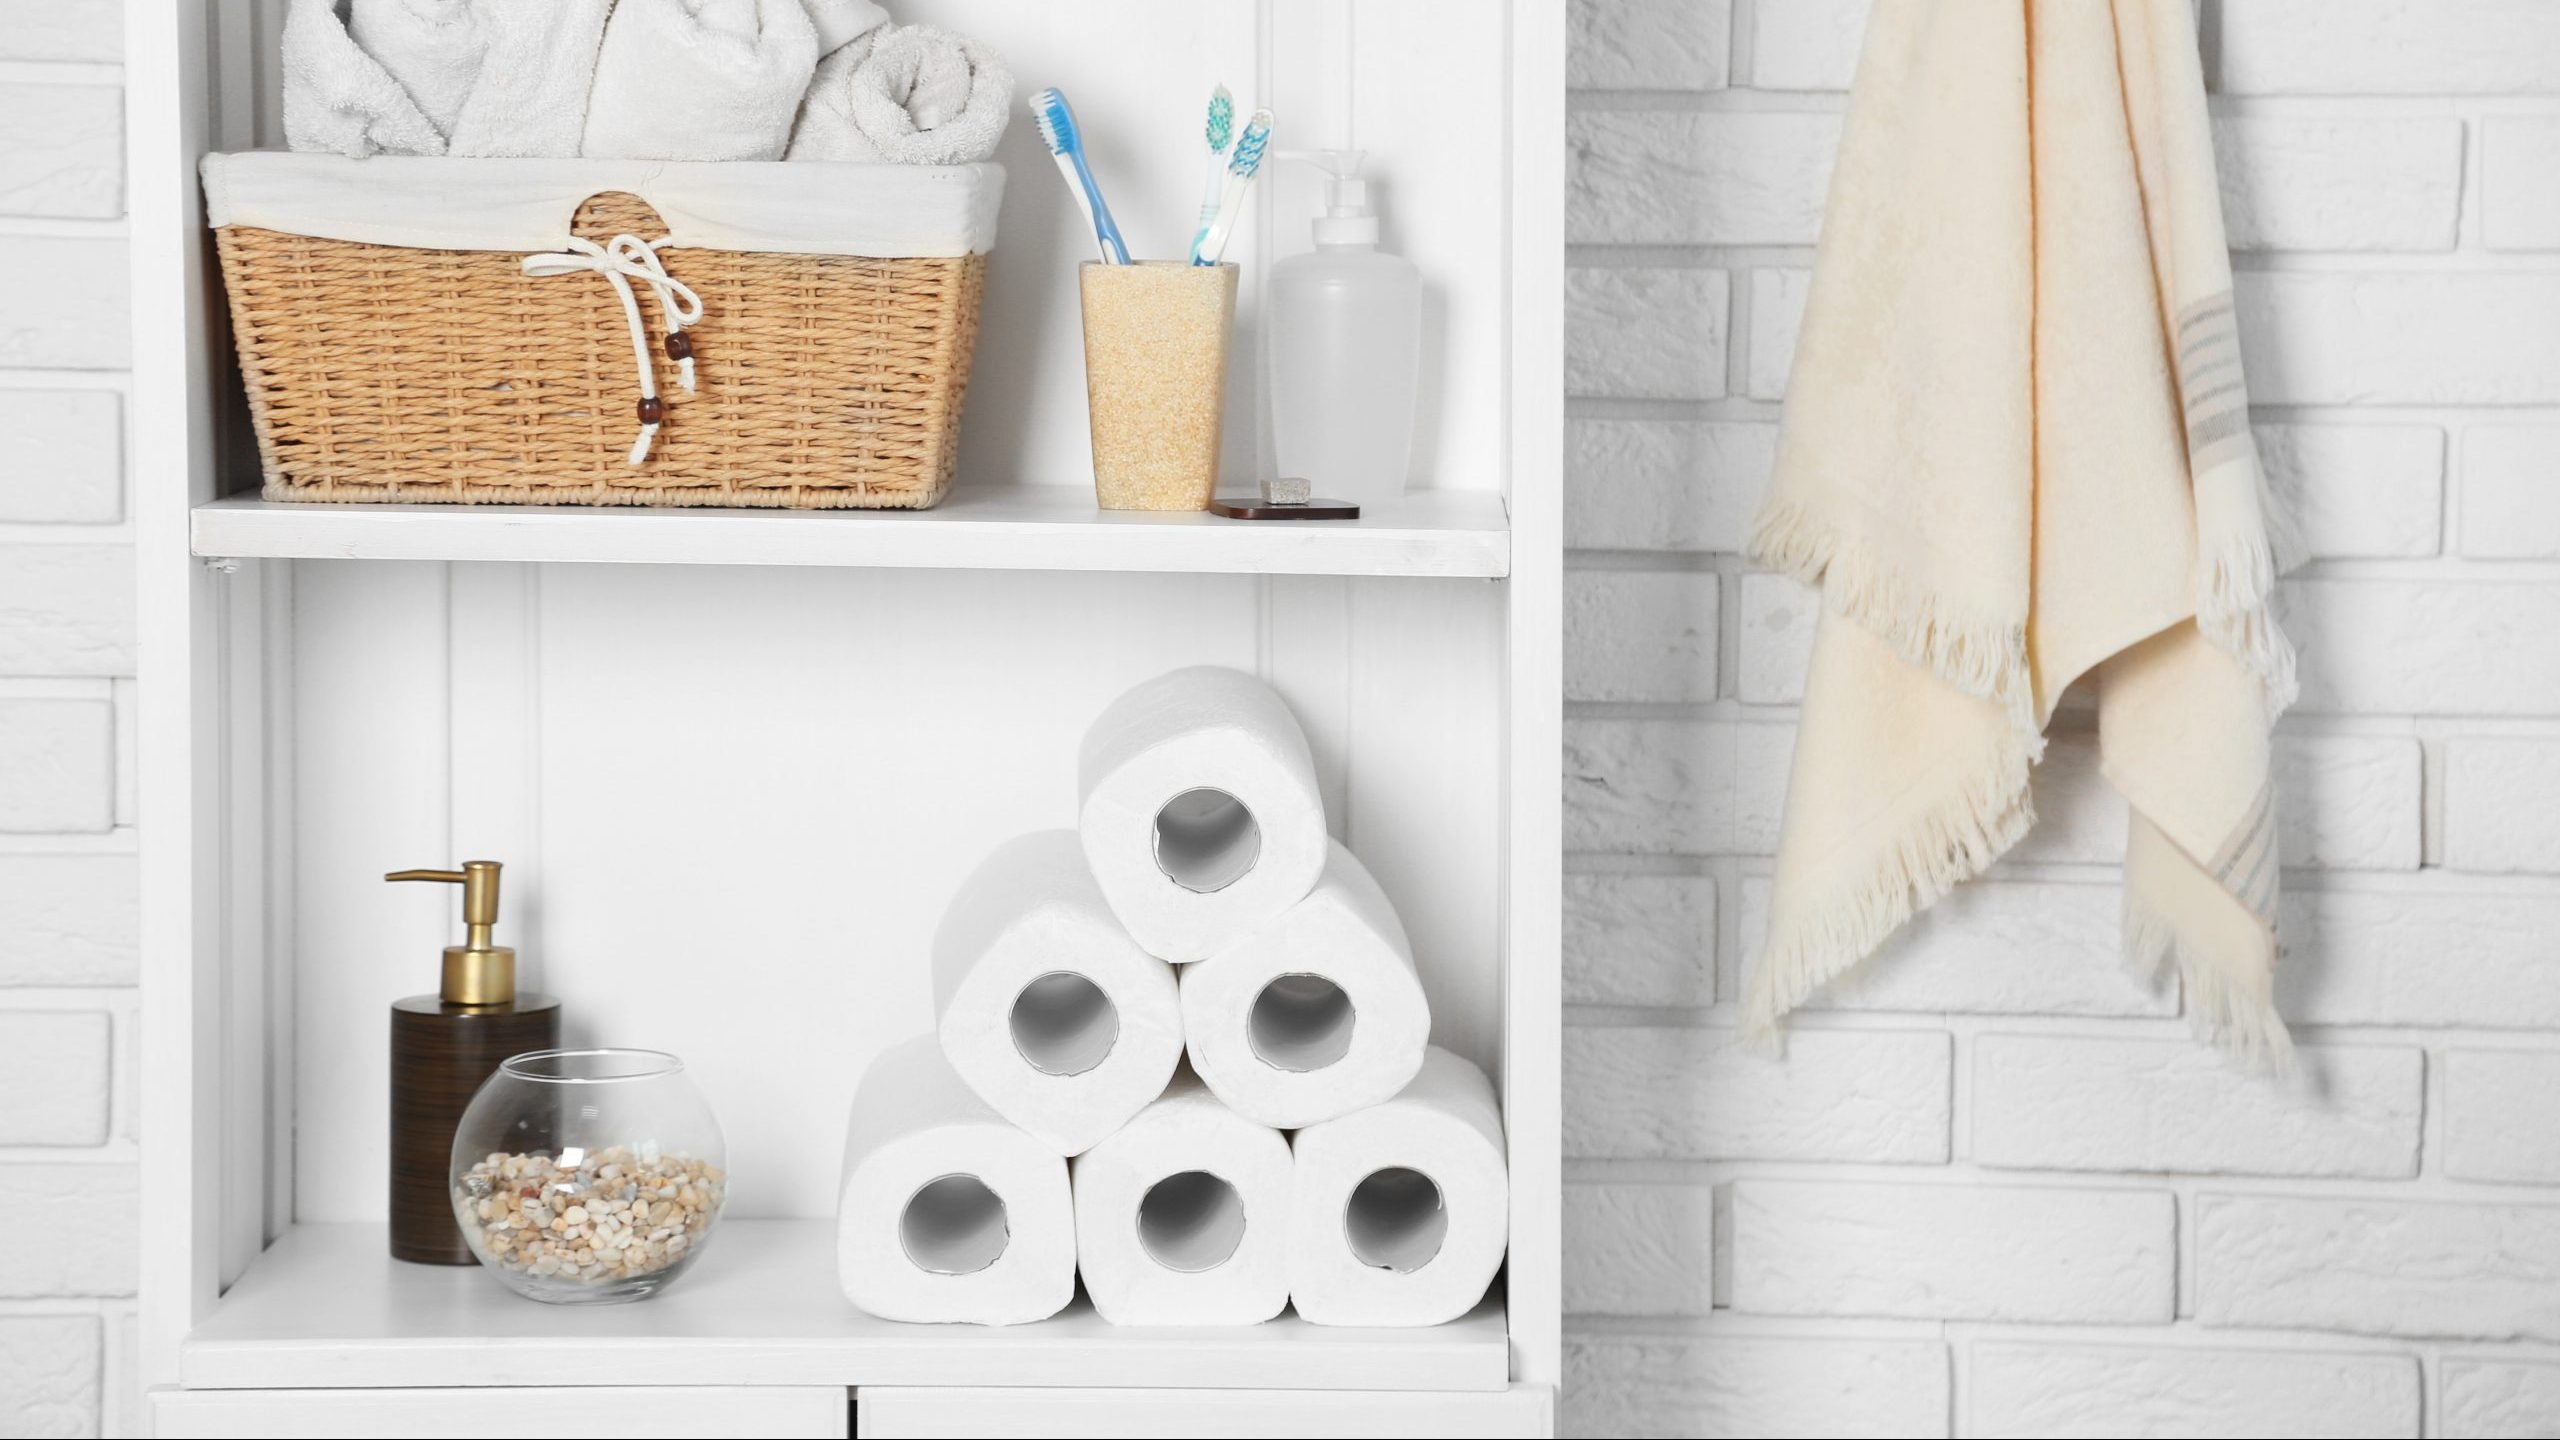 6 Clever Toilet Paper Storage Solutions for Small Bathrooms